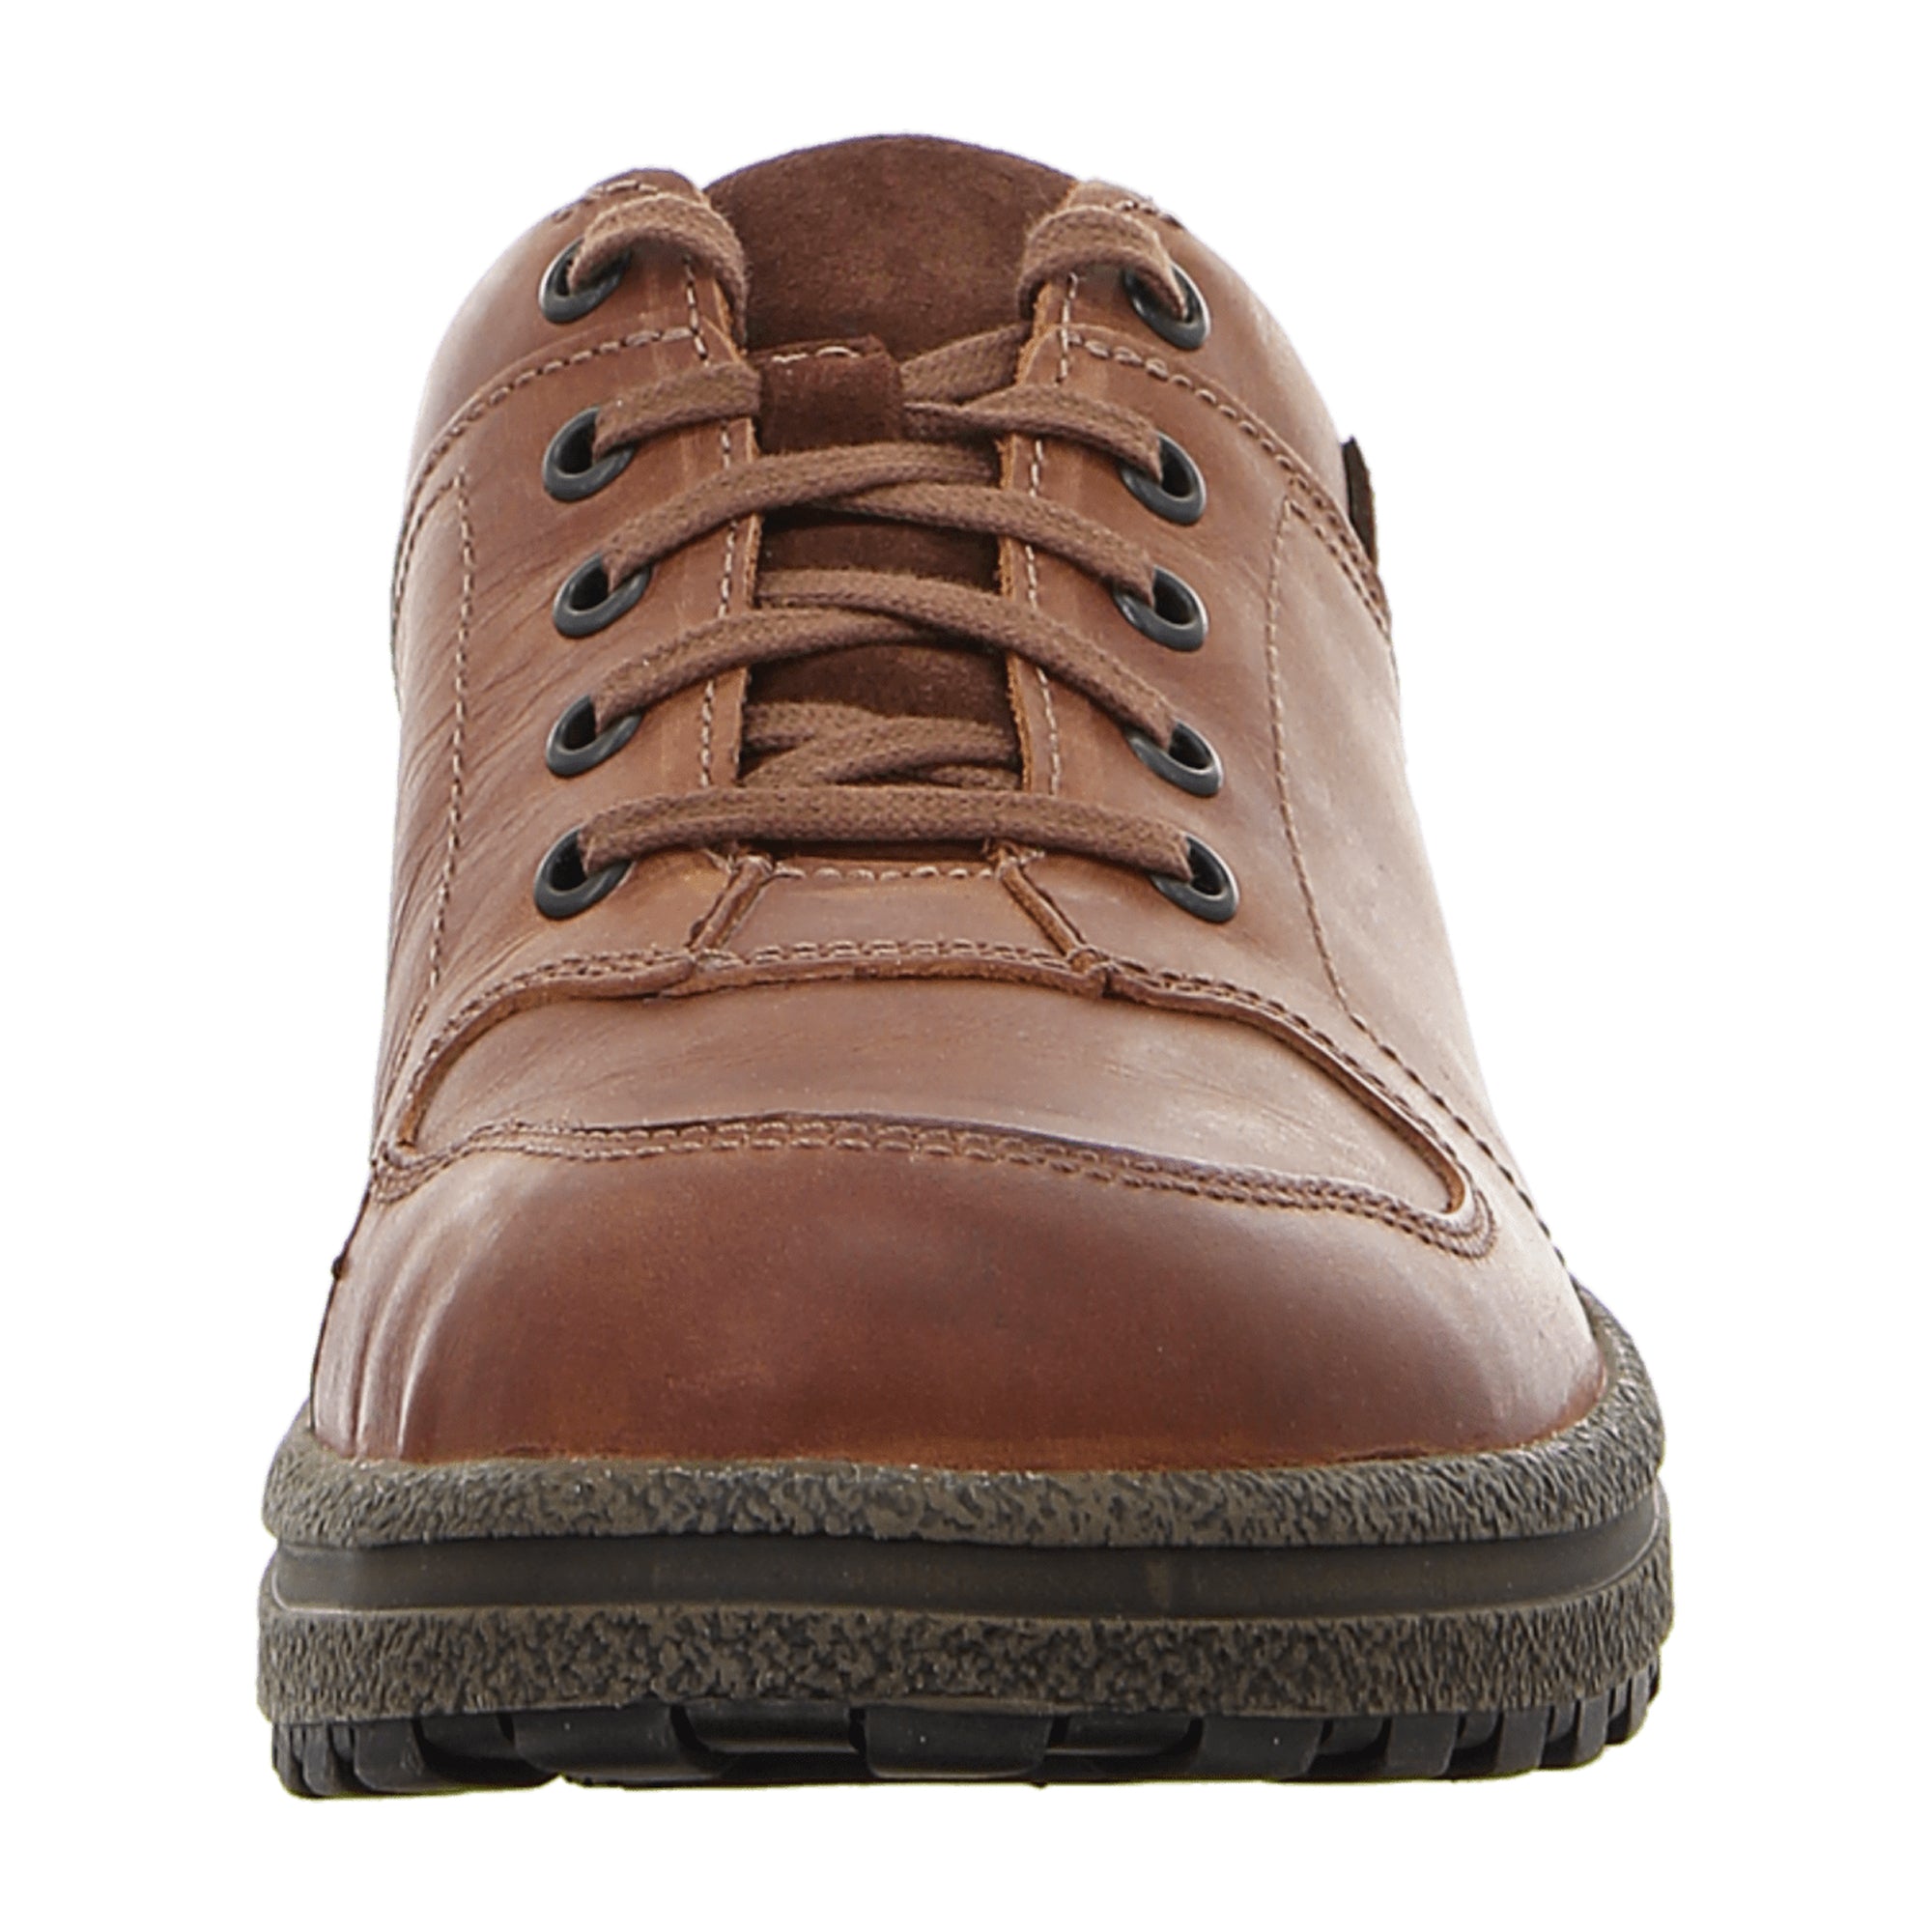 Josef Seibel Comfortable Lace-up Shoes for Men in Brown